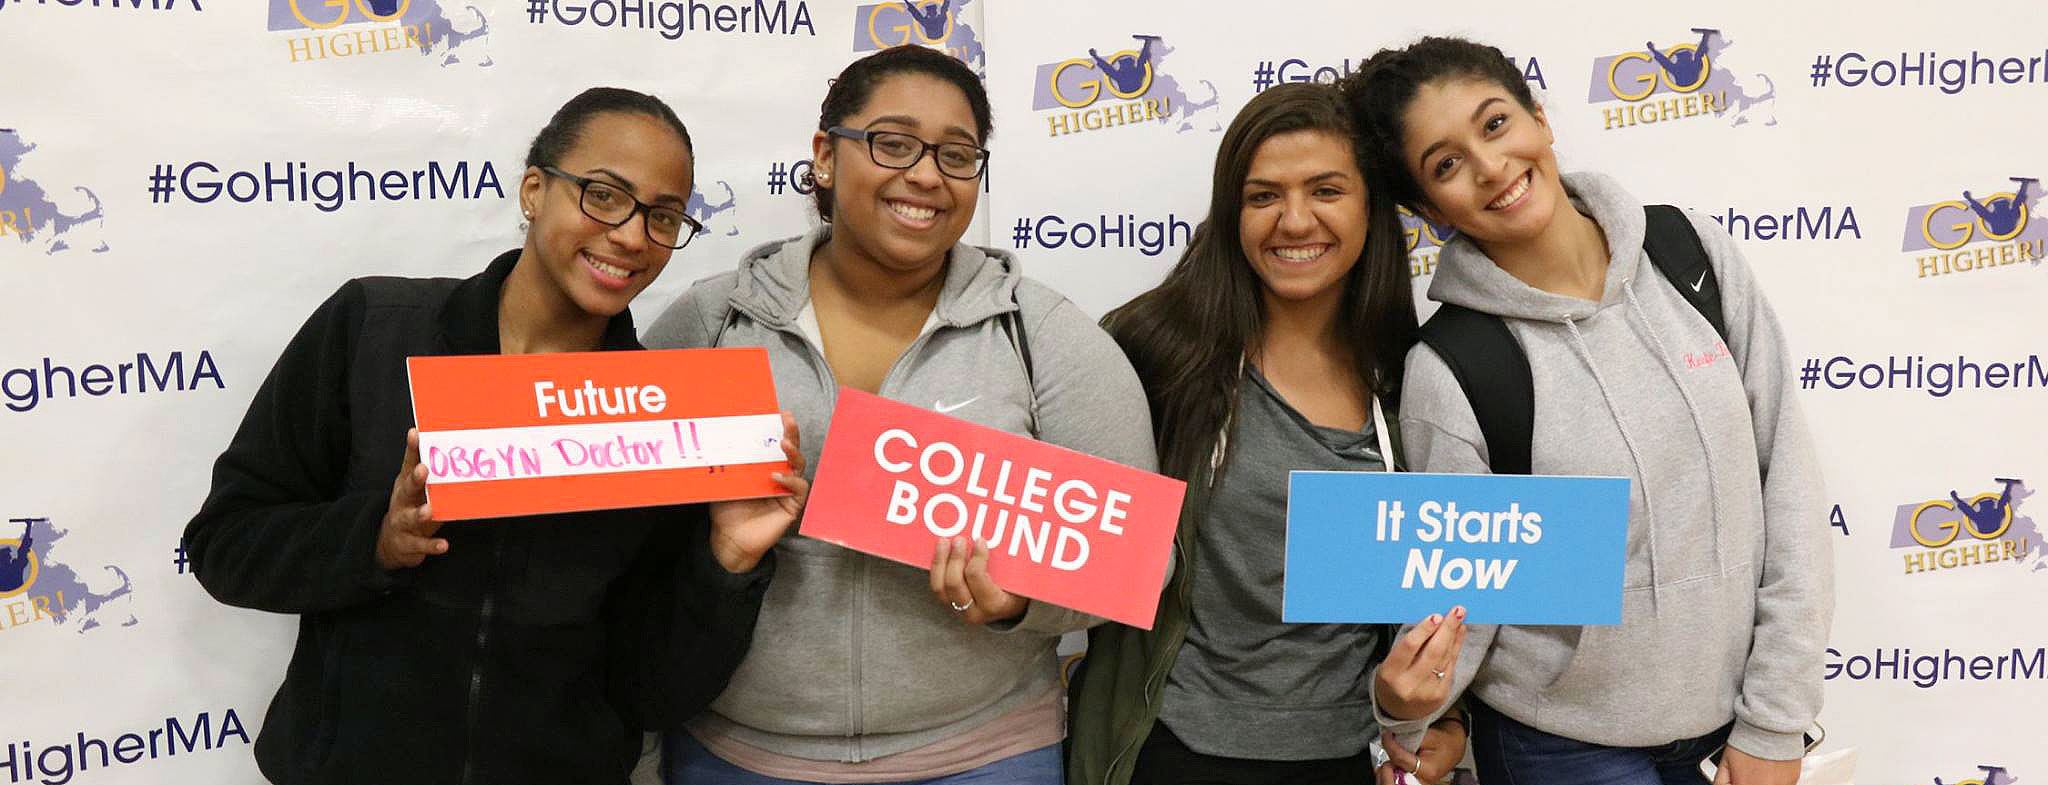 Students pose in the #GoHigherMA photo booth with signs that read 'Future OGBYN doctor,' 'COLLEGE BOUND,' and 'It Starts Now.'